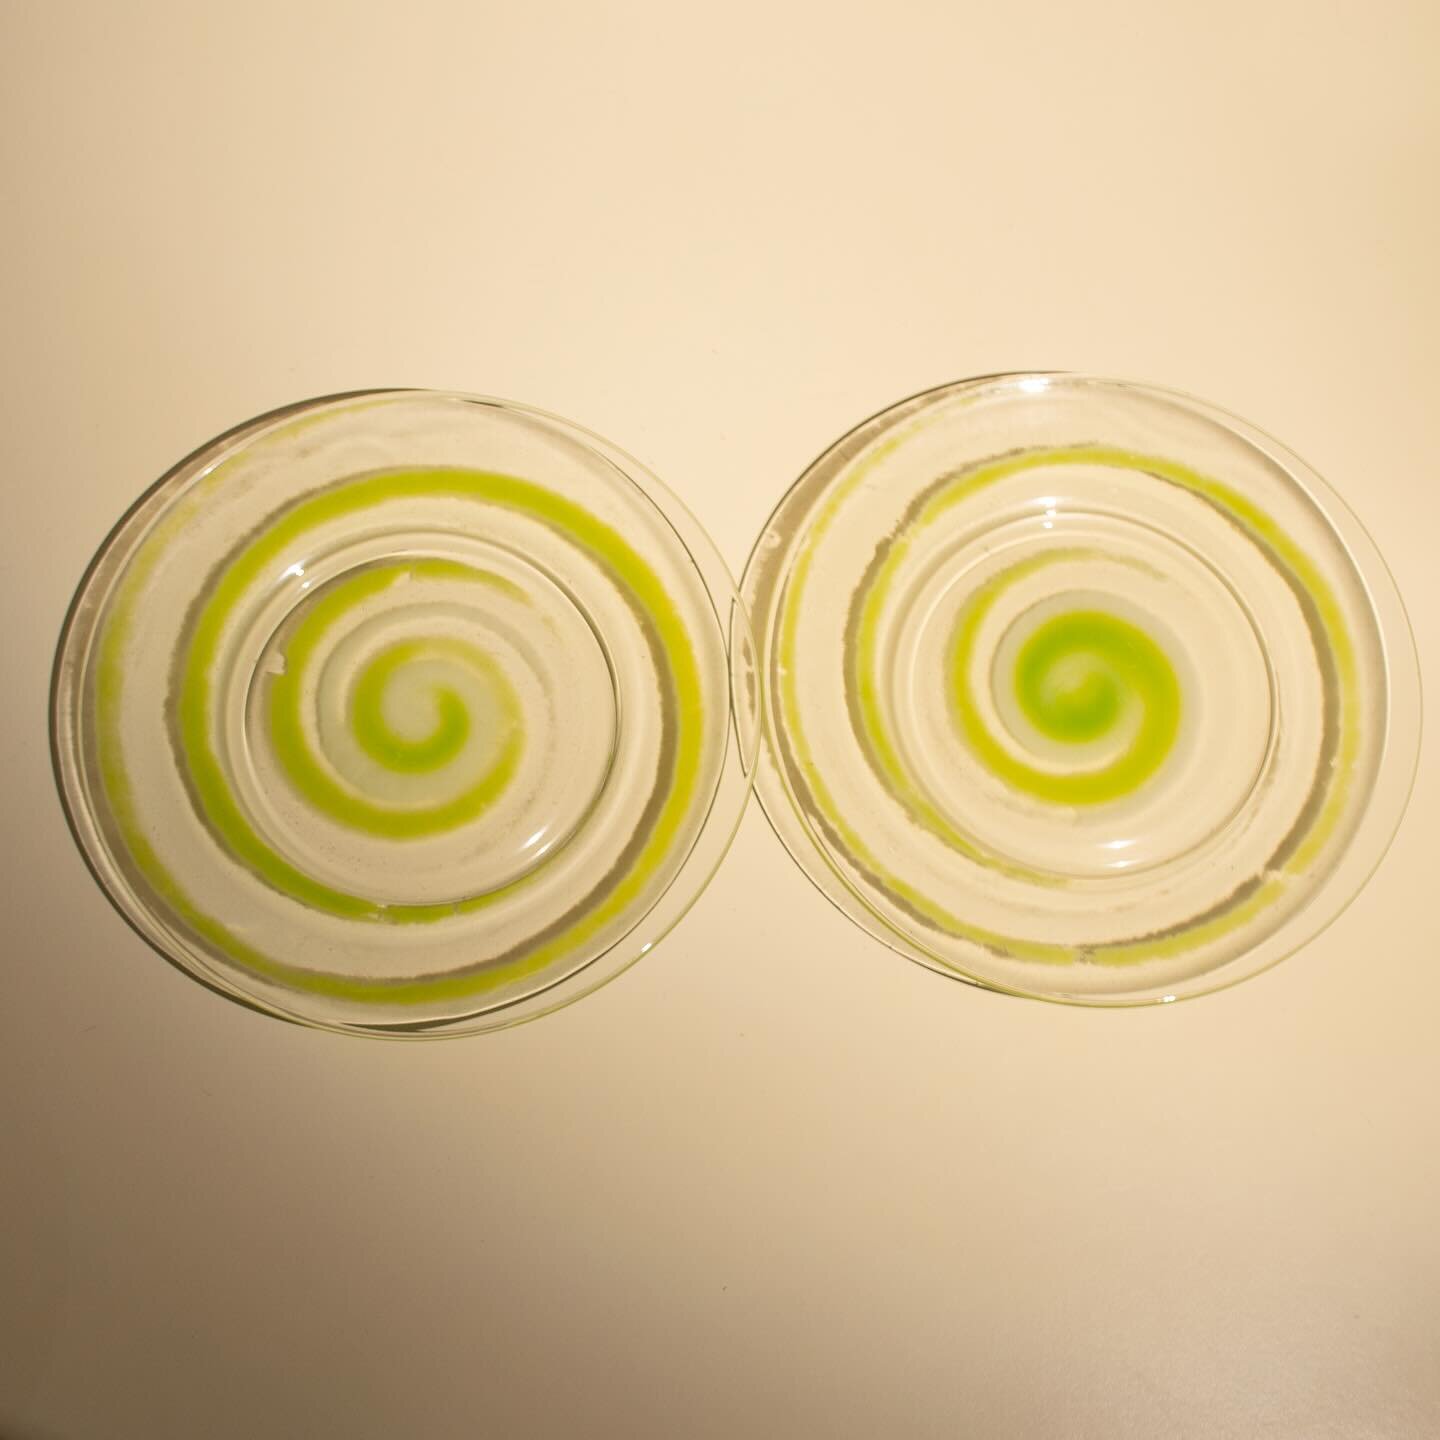 Spiral printed glass dishes. 🌀Spiral pattern varies per dish. Signs of vintage wear consistent with age. 

Three sets of two available 
Set 1: lime green 
Set 2: brown
Set 3: red/orange

$30/set of two

Purchase on our website or dm with email and z